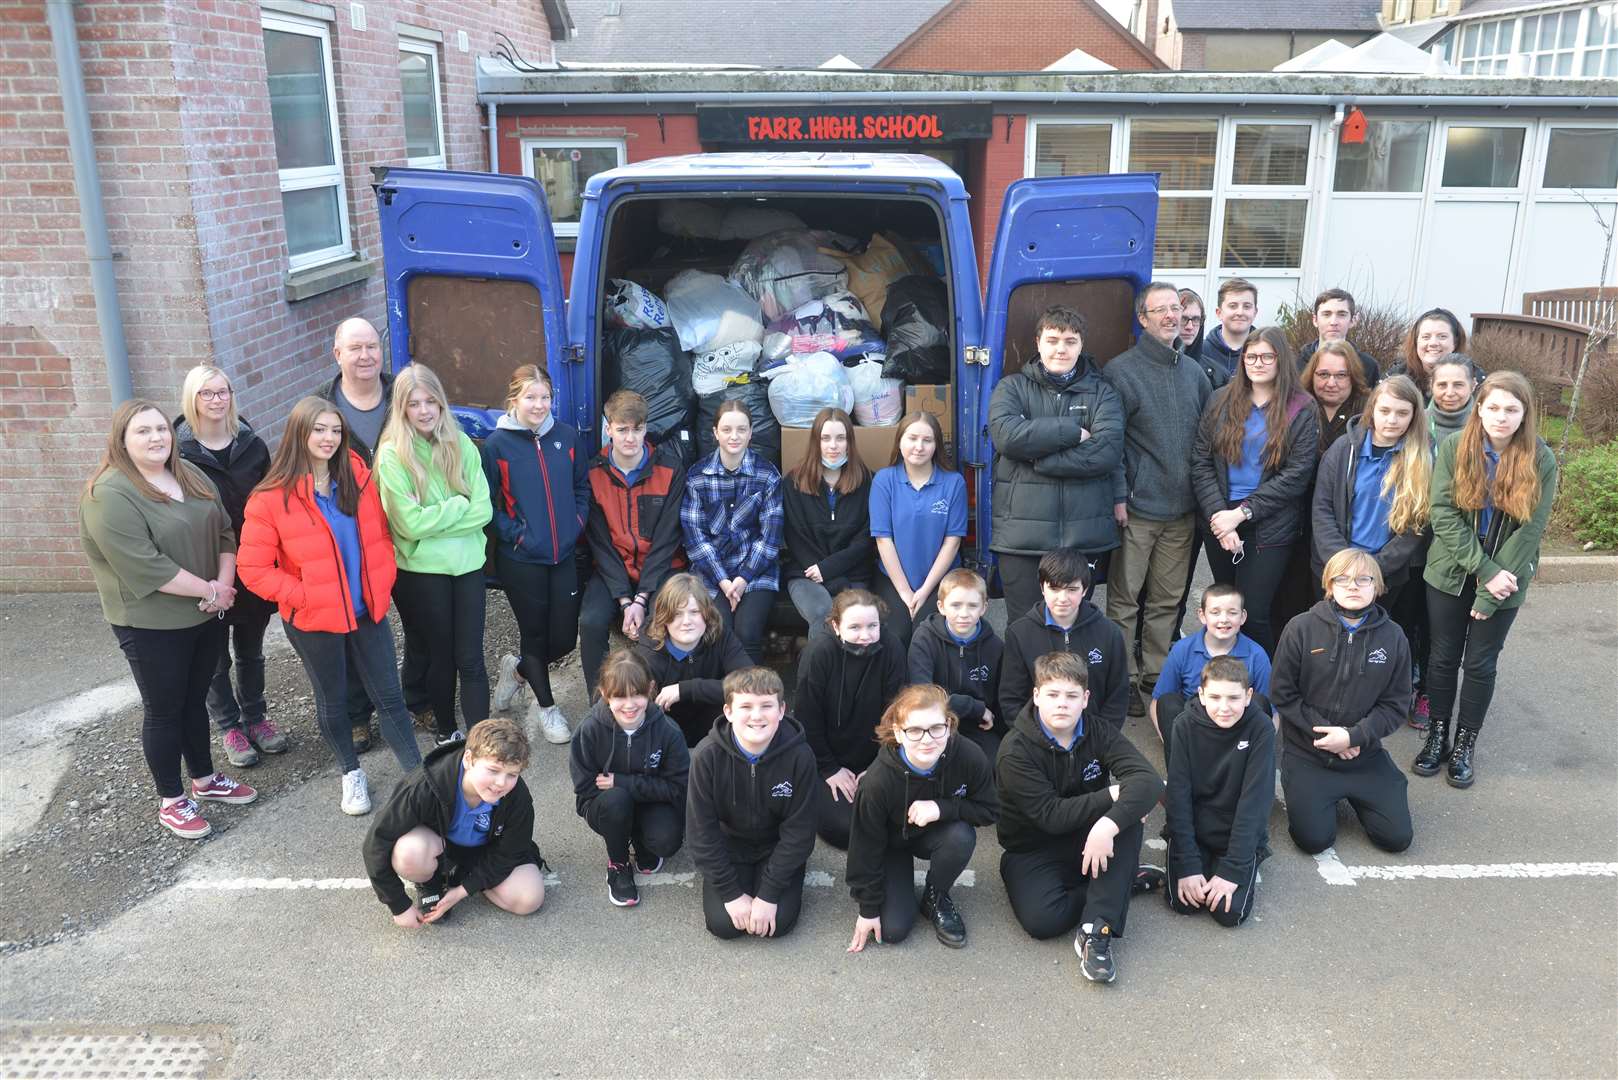 The donations were taken to Farr High School where they were sorted by pupil volunteers and loaded onto a van. Picture: Jim A Johnston